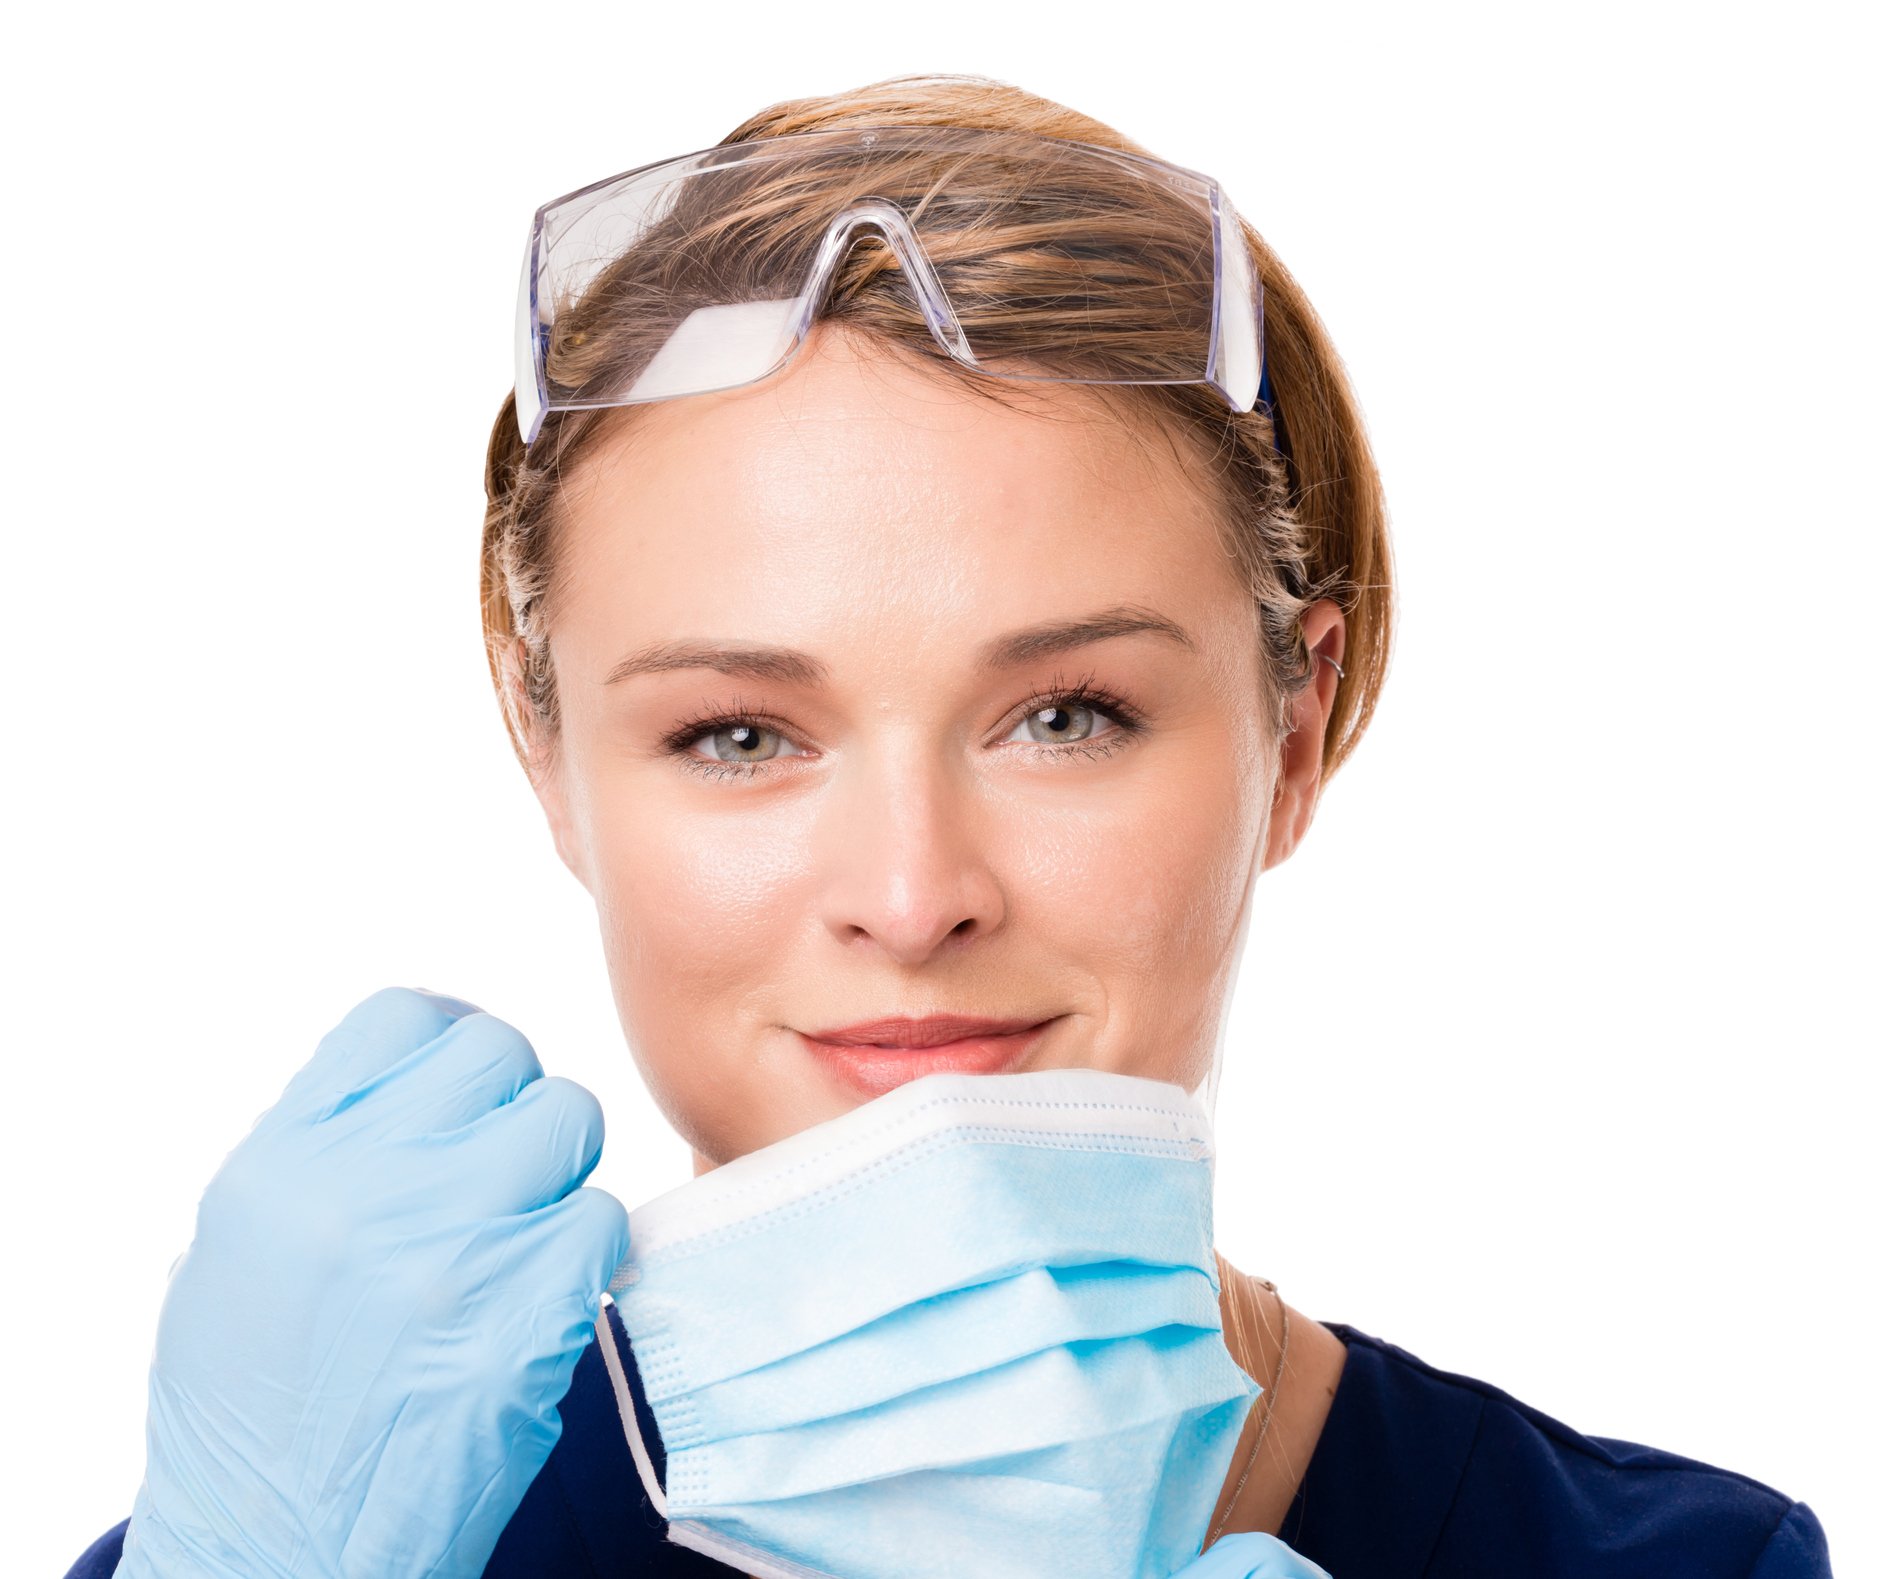 Dental worker with PPE